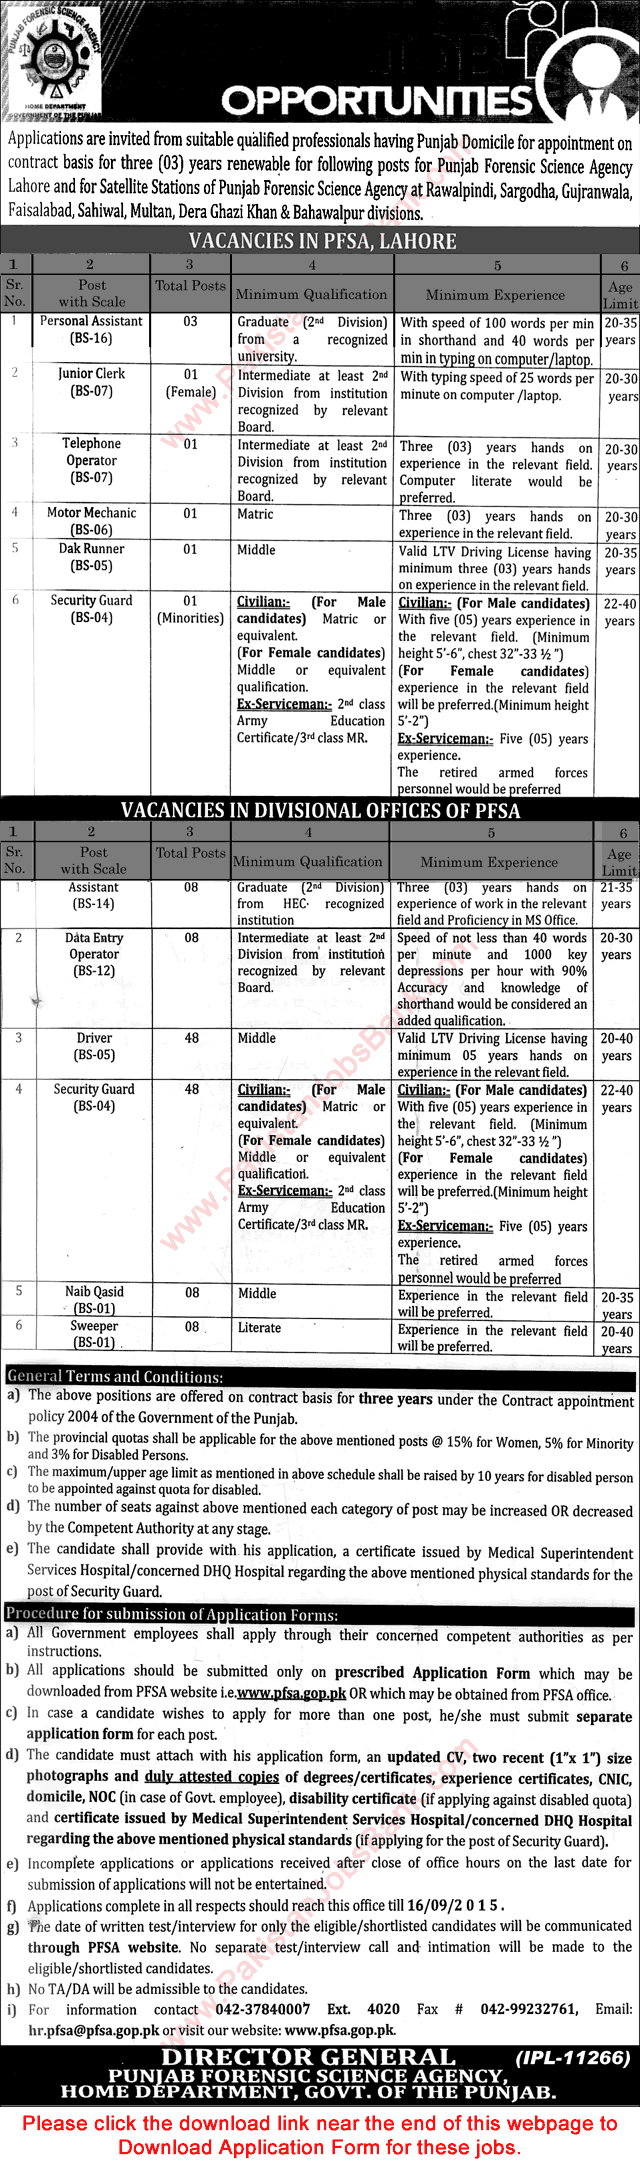 Punjab Forensic Science Agency Jobs August 2015 PFSA Application Form Admin & Support Staff Latest